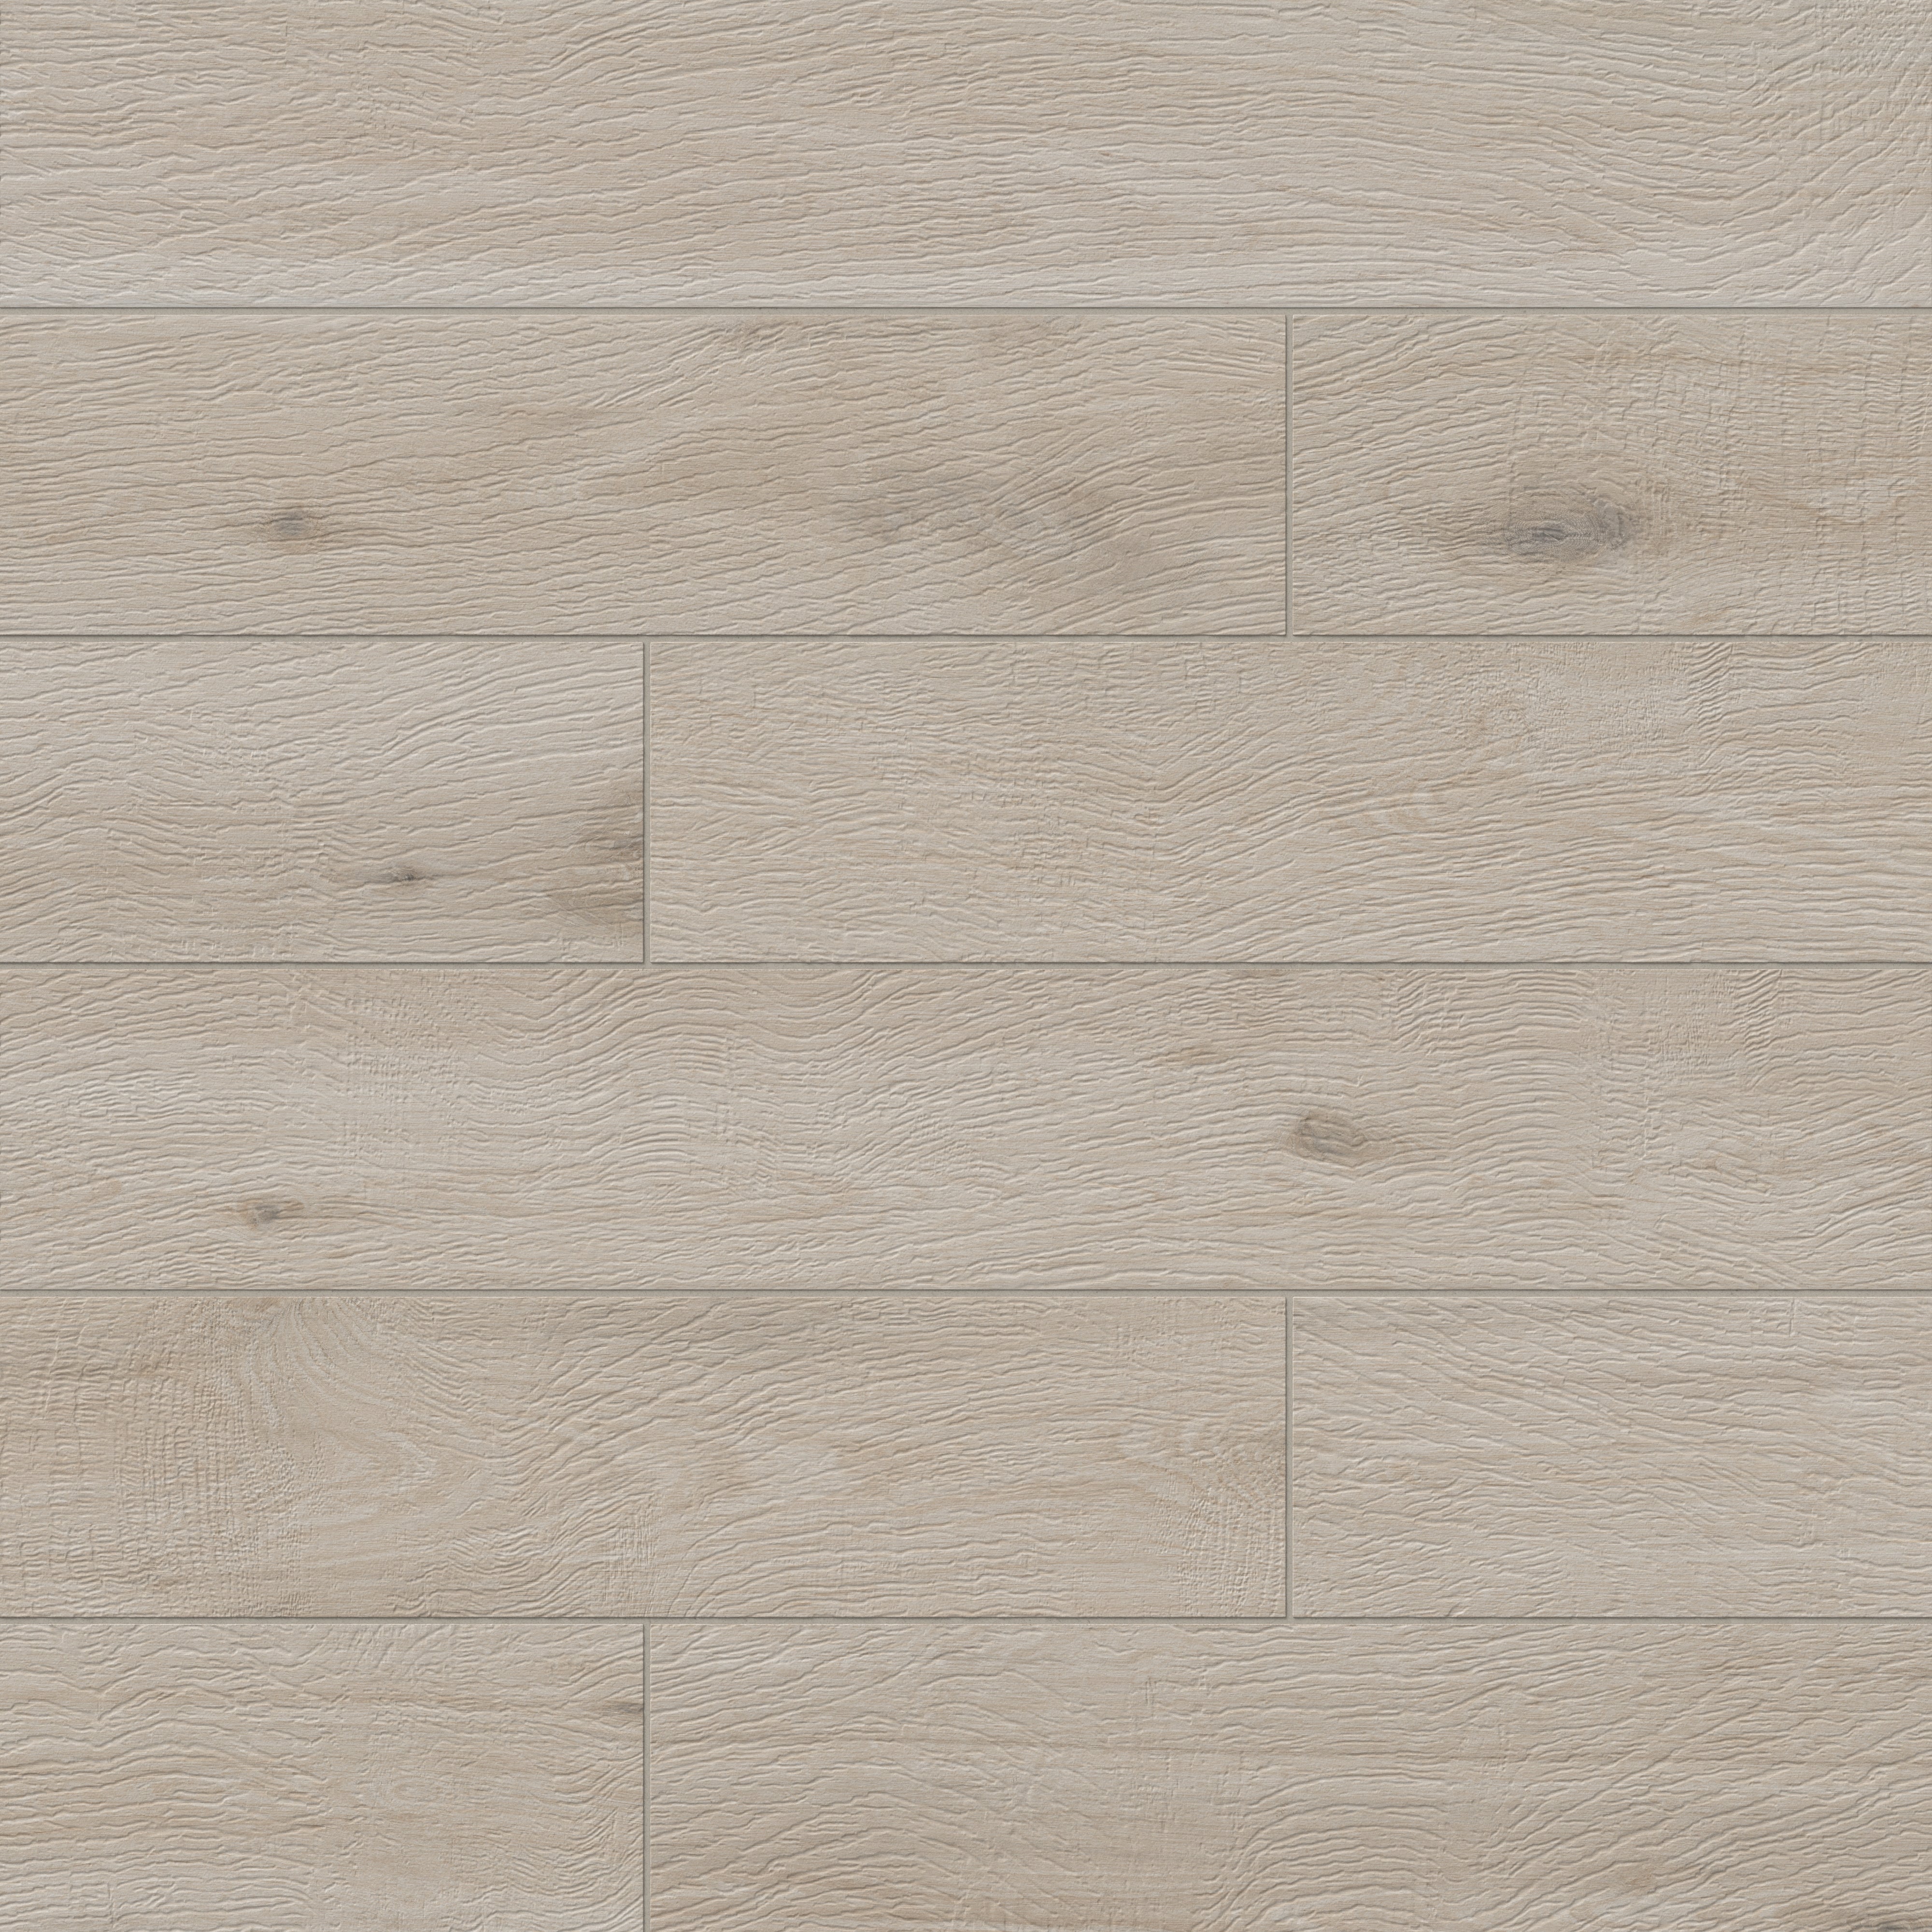 Close-up view of Preston's wood-look porcelain plank in the delicate and light Poplar hue, capturing the authentic grain and subtlety of its shade.